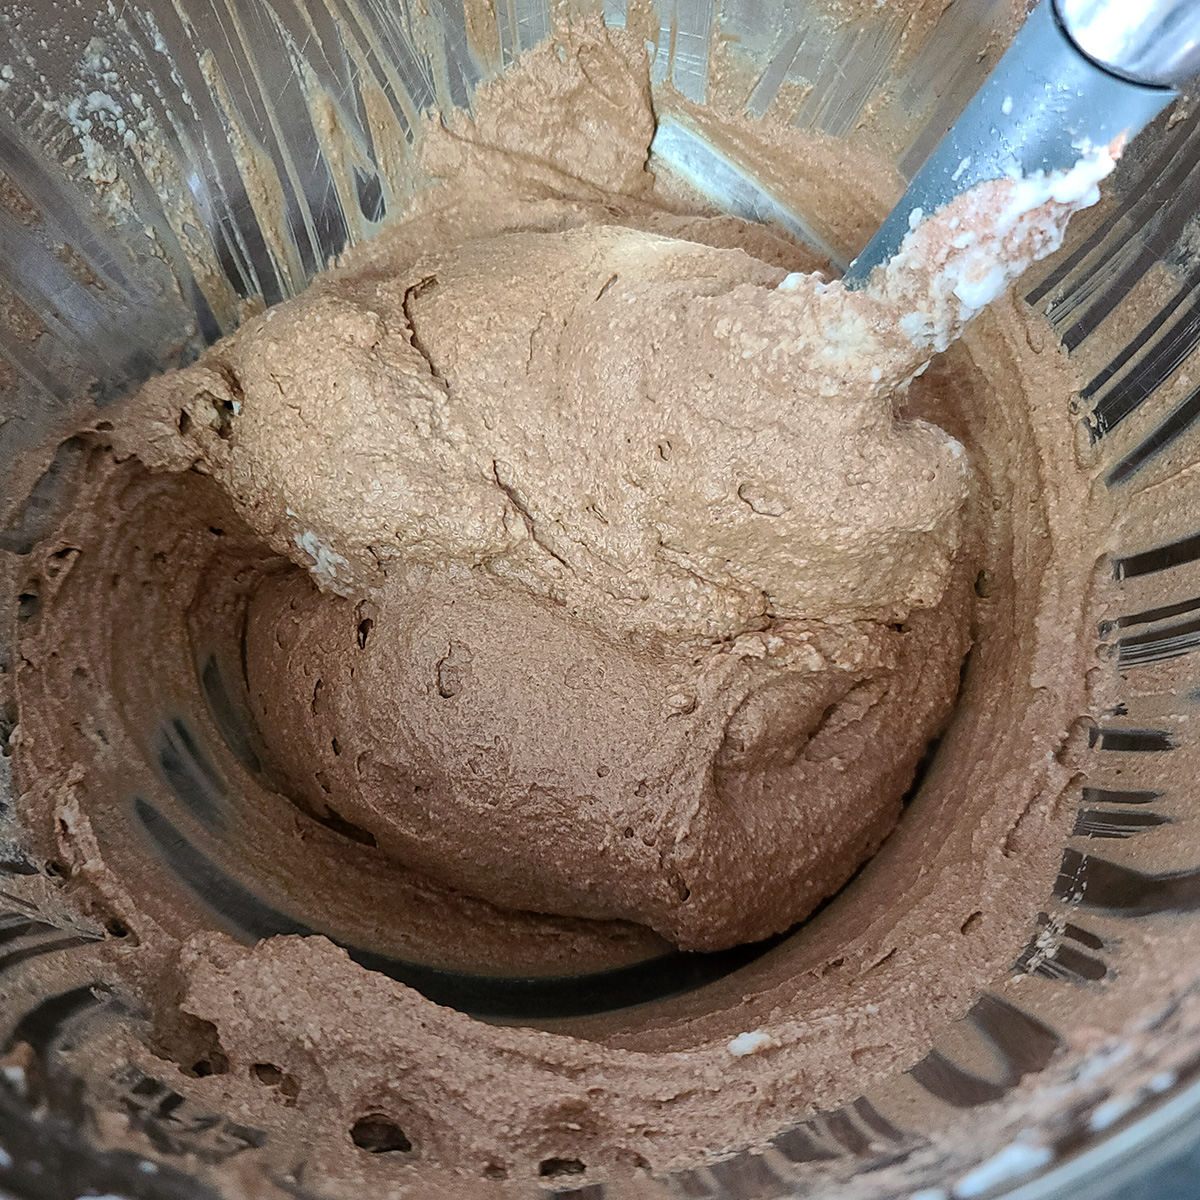 Keto chocolate mousse in a large mixing bowl, ready to put in glasses.